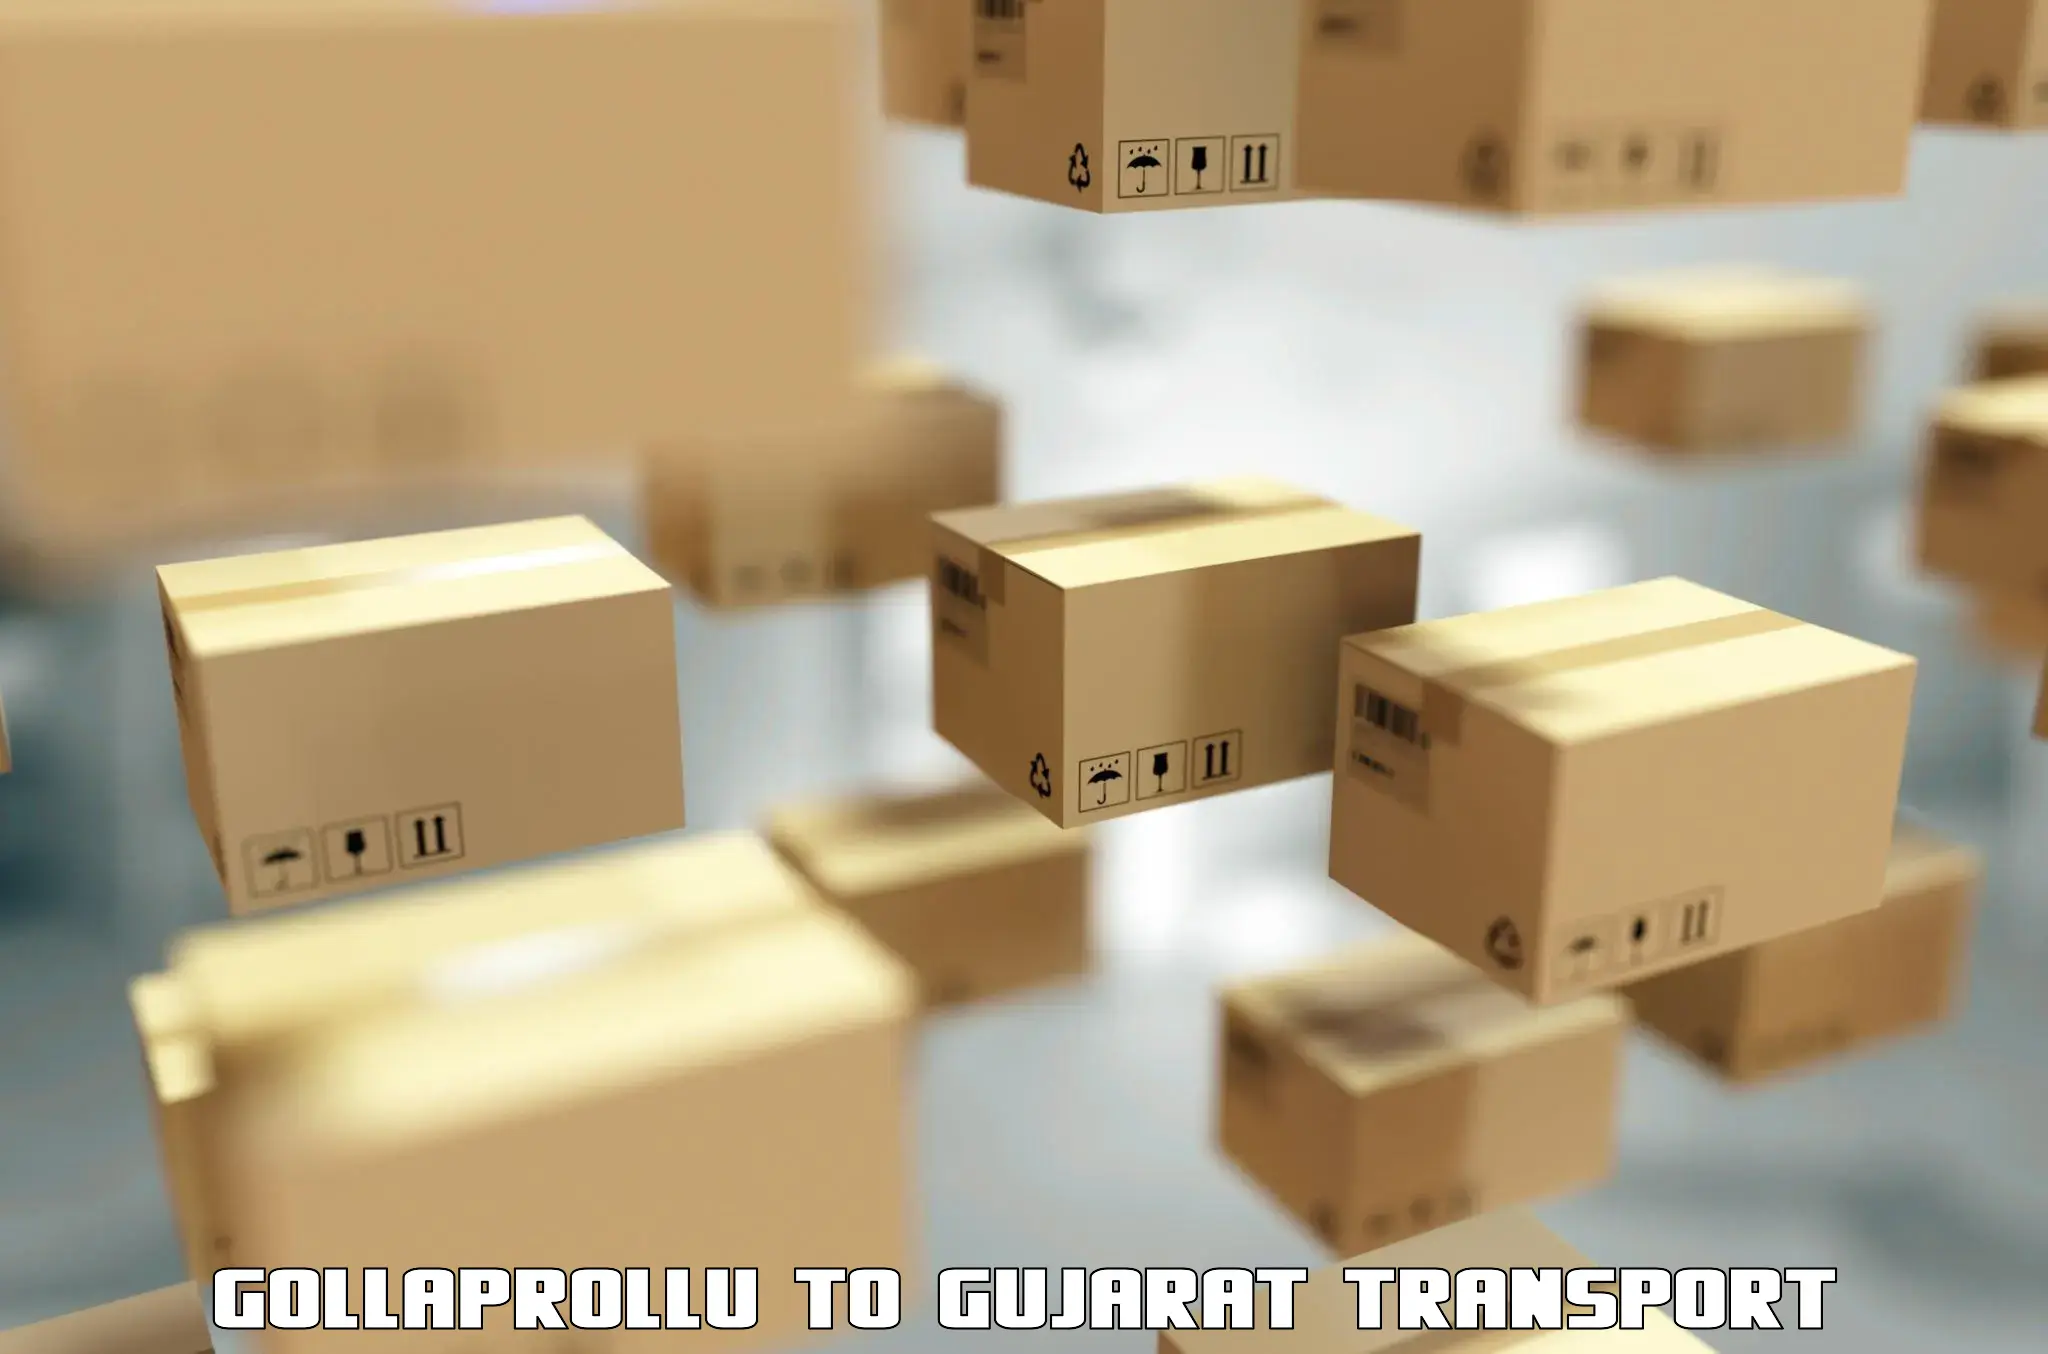 Road transport online services Gollaprollu to Tapi